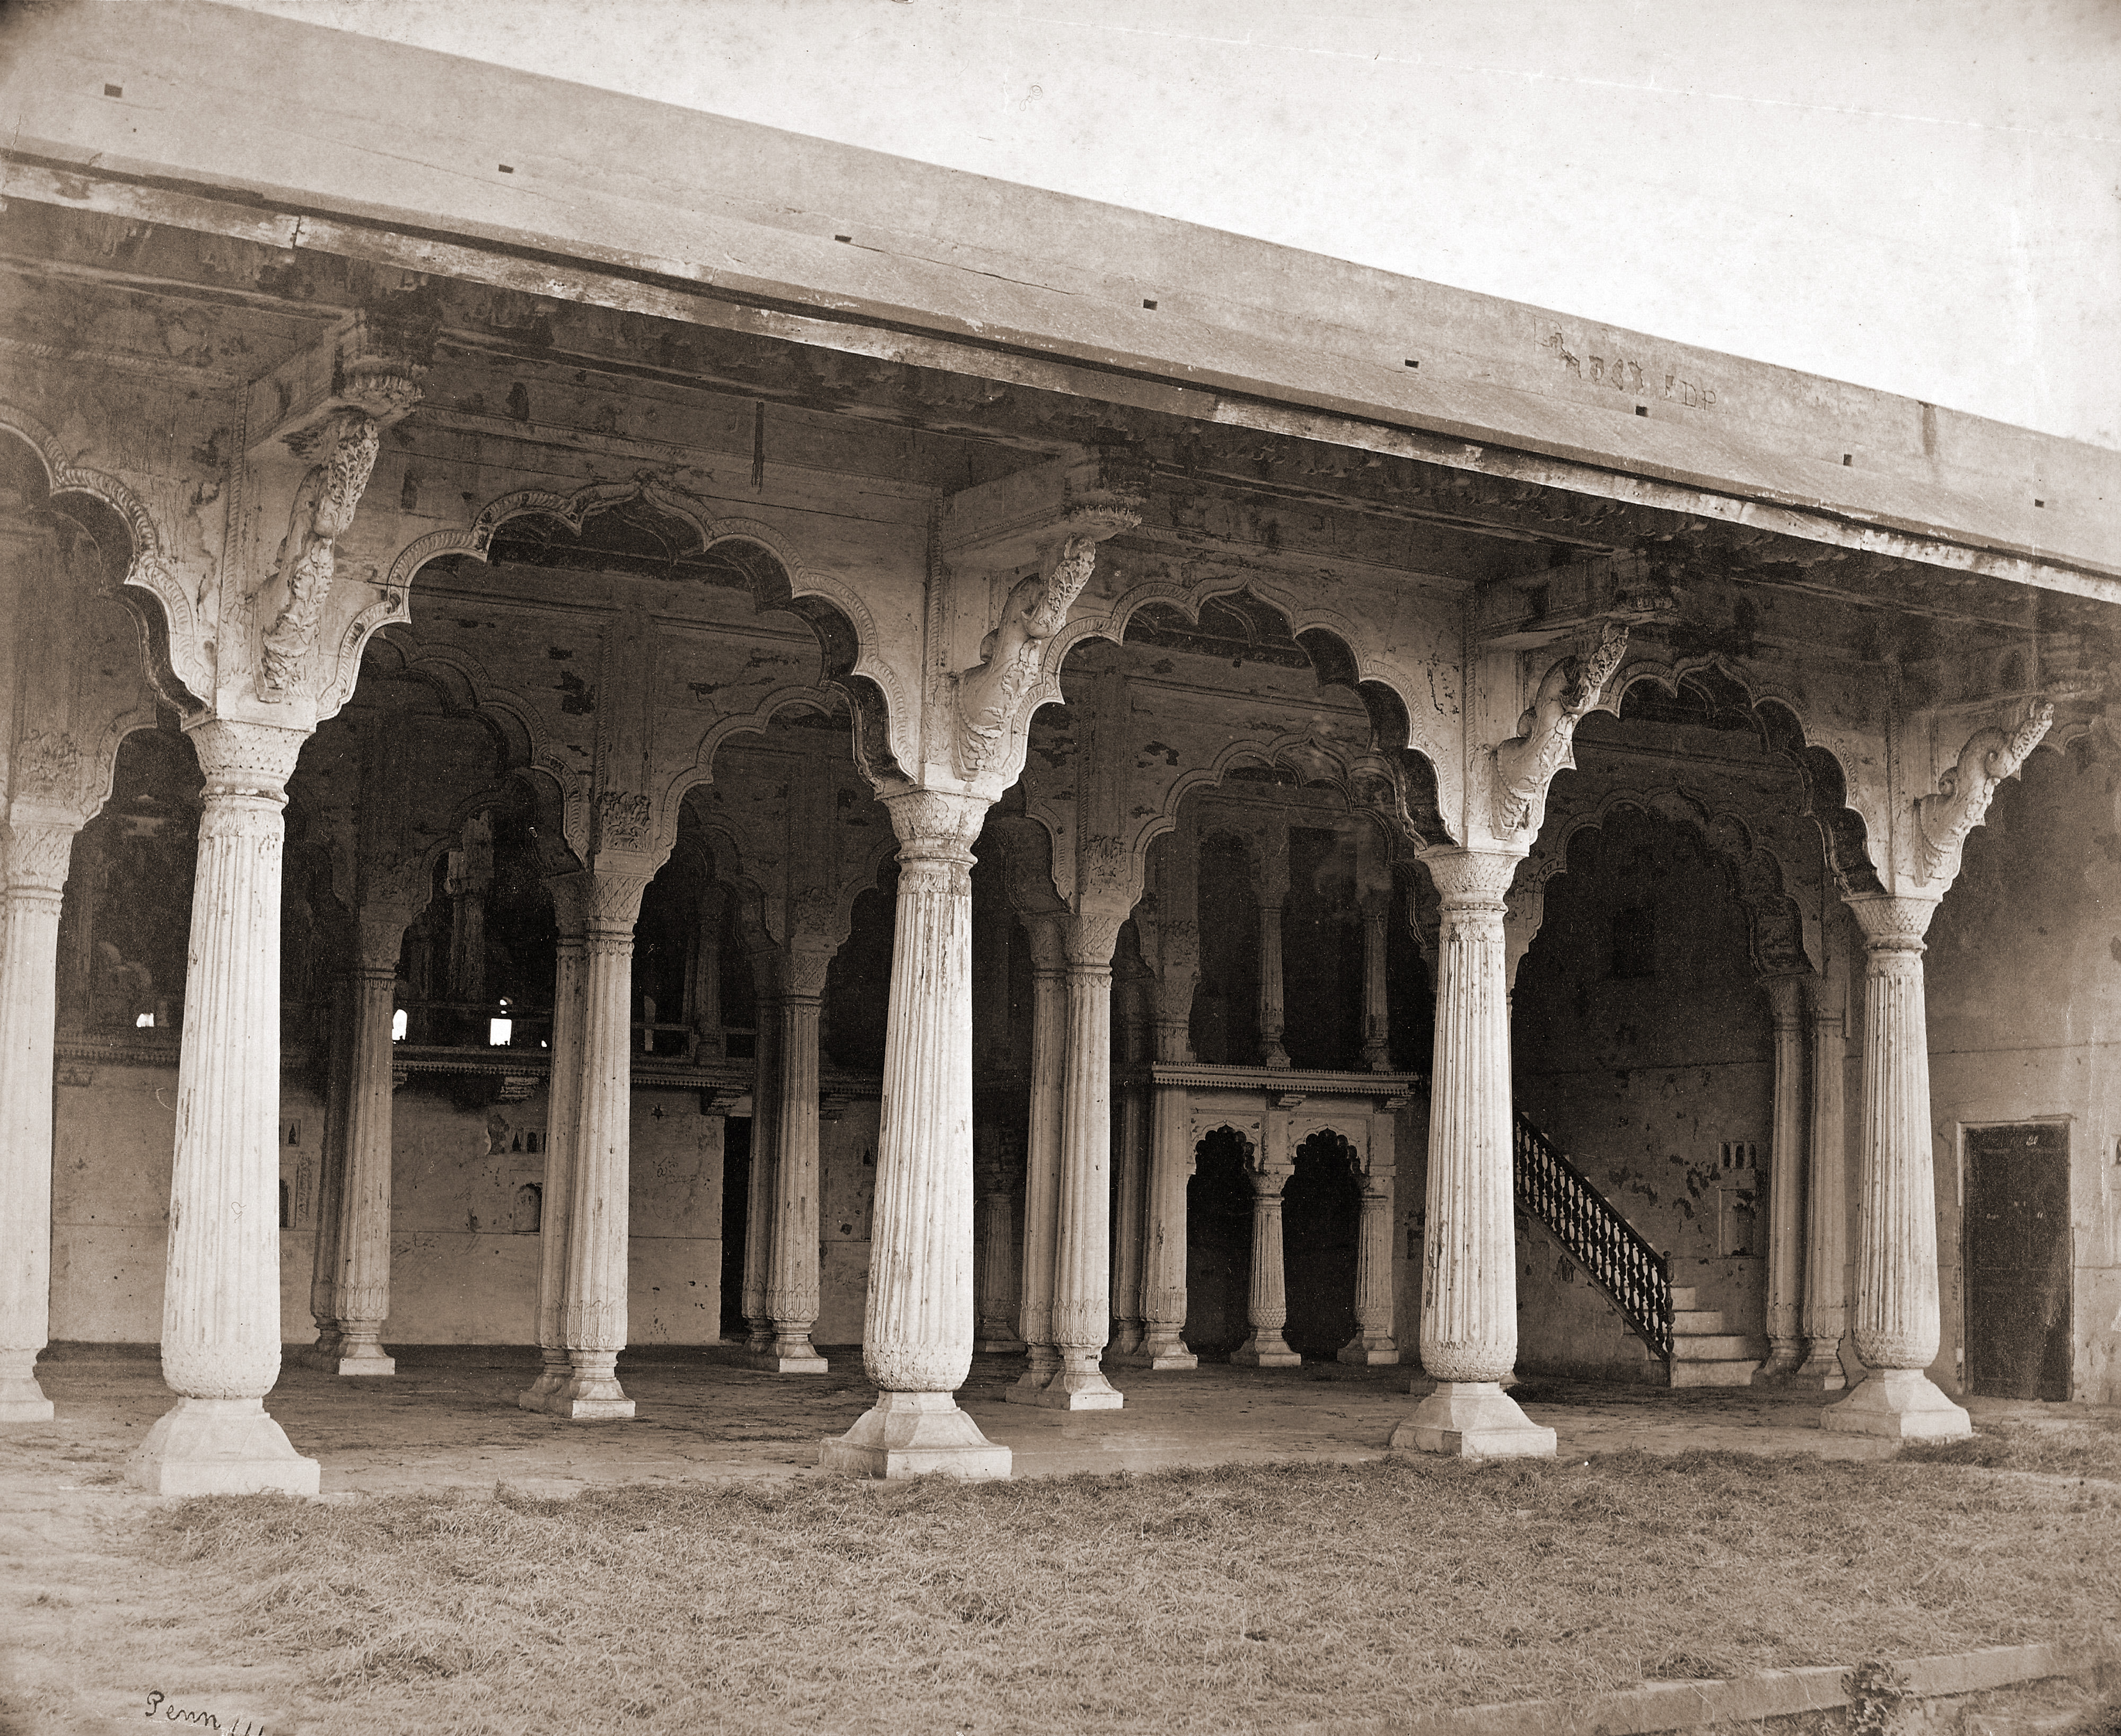 File:The Old Palace in the Fort, Bangalore..jpg - Wikimedia Commons